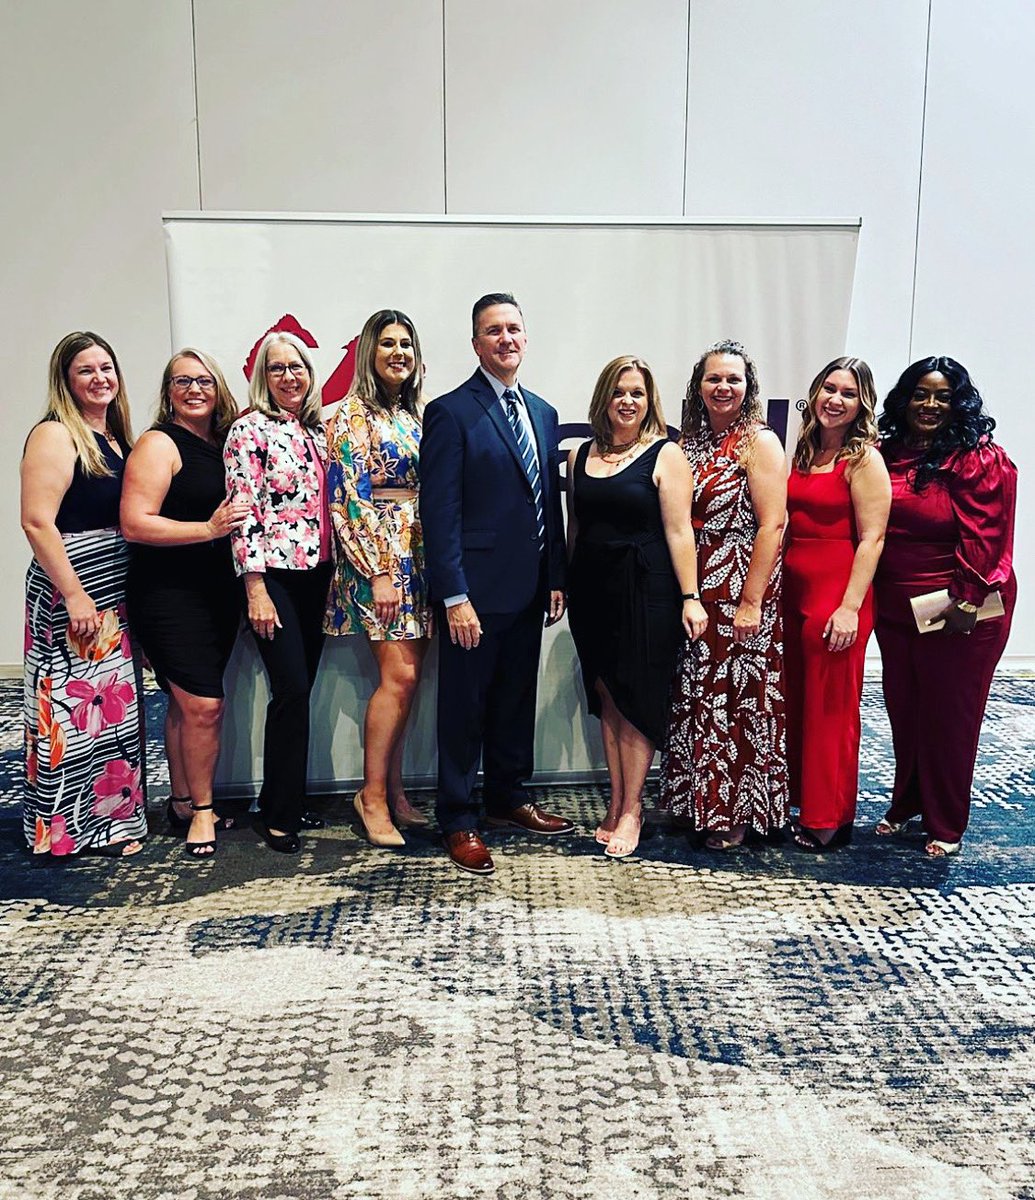 THANK YOU @madd_fl for supporting law enforcement, being a valued safety partner, community educator and such a wonderful host for the recognition ceremony! 
We appreciate you, your leadership, and daily efforts!
#florida #nomorevictims